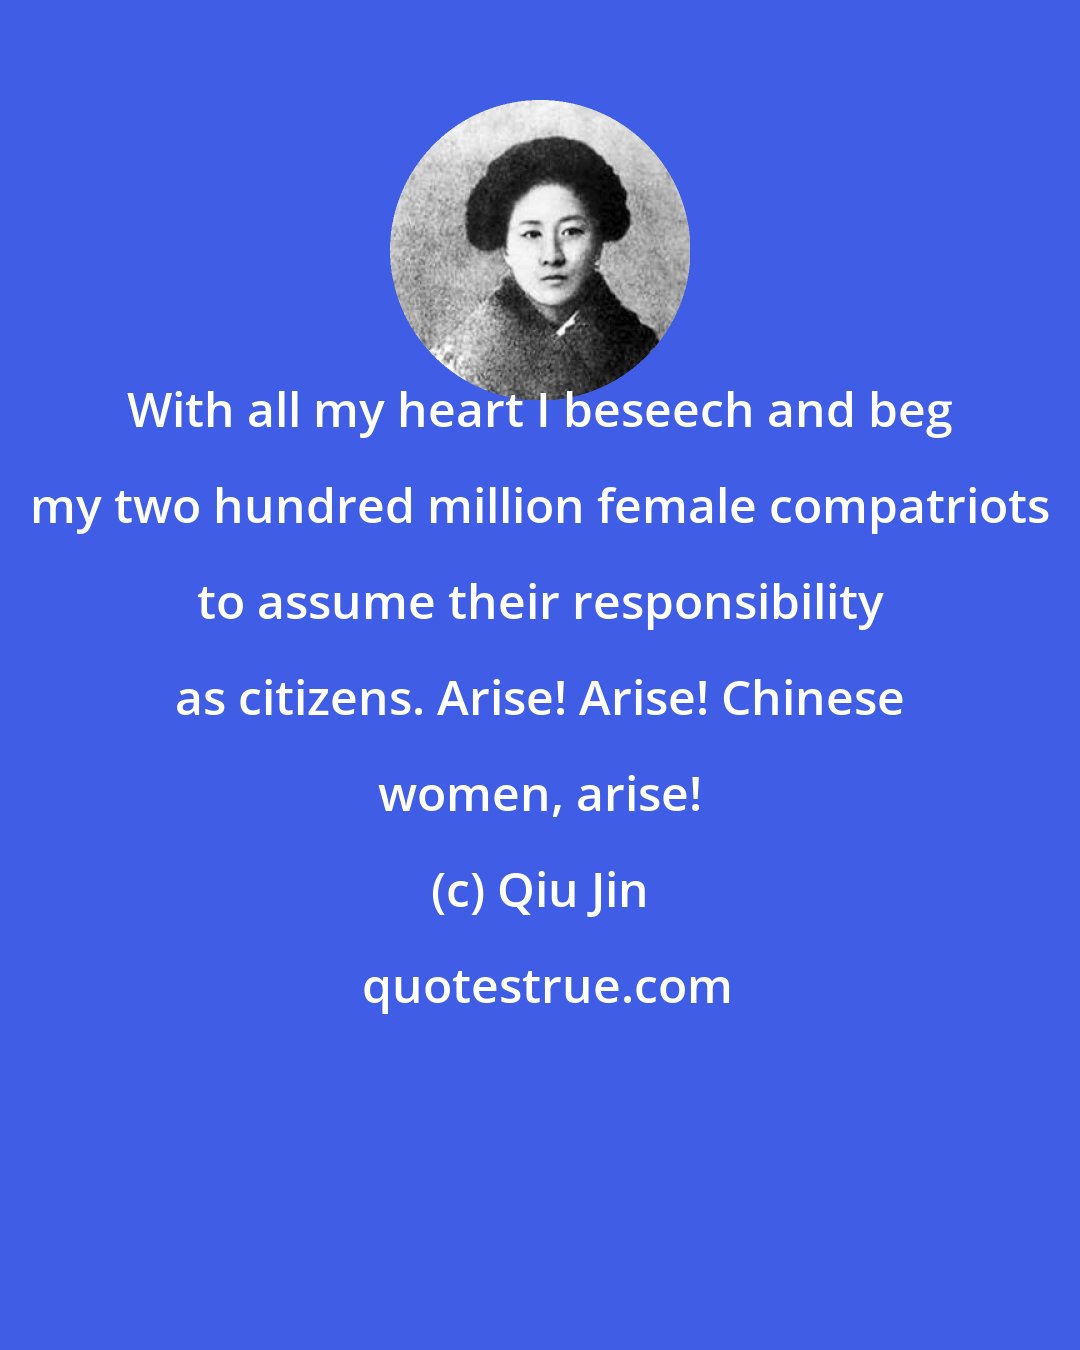 Qiu Jin: With all my heart I beseech and beg my two hundred million female compatriots to assume their responsibility as citizens. Arise! Arise! Chinese women, arise!